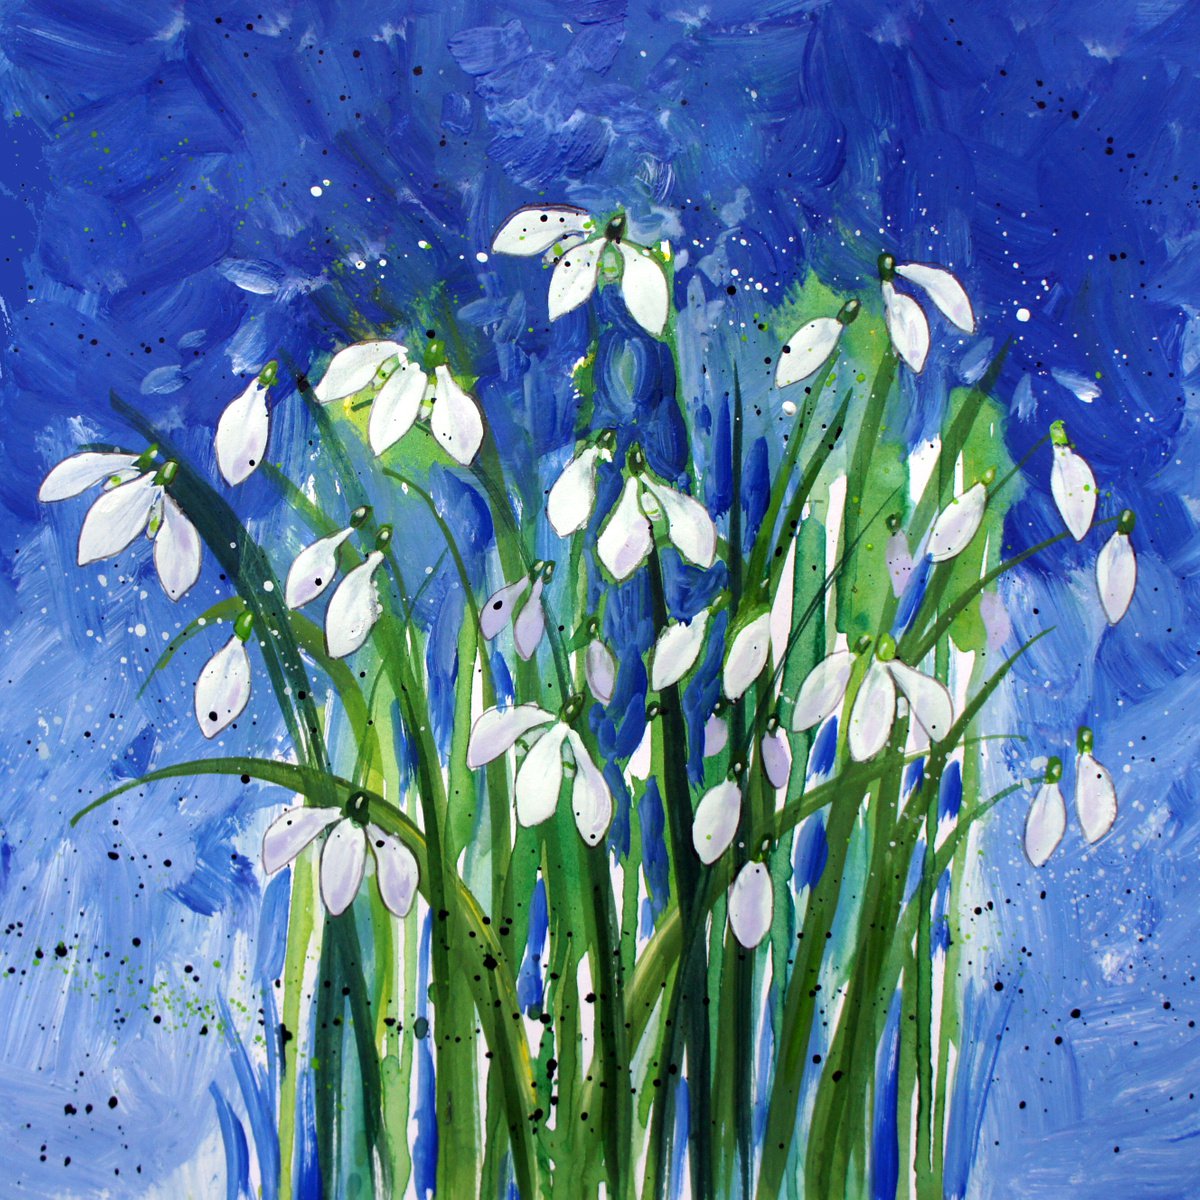 Snowdrops on Blue by Julia Rigby